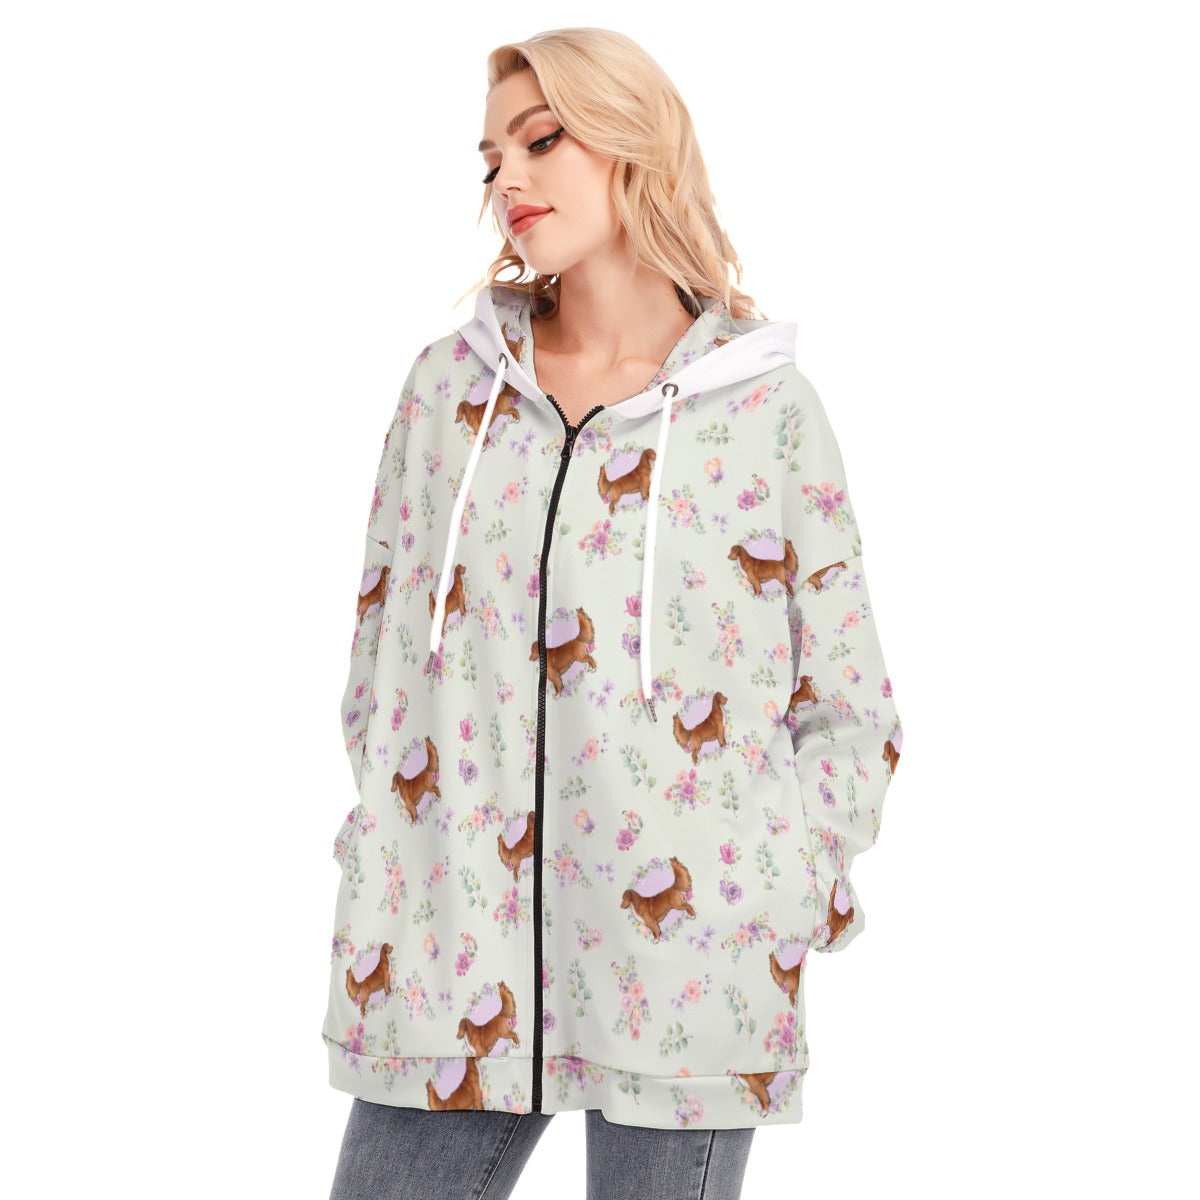 All-Over Print Women's Long Hoodie With Zipper Closure